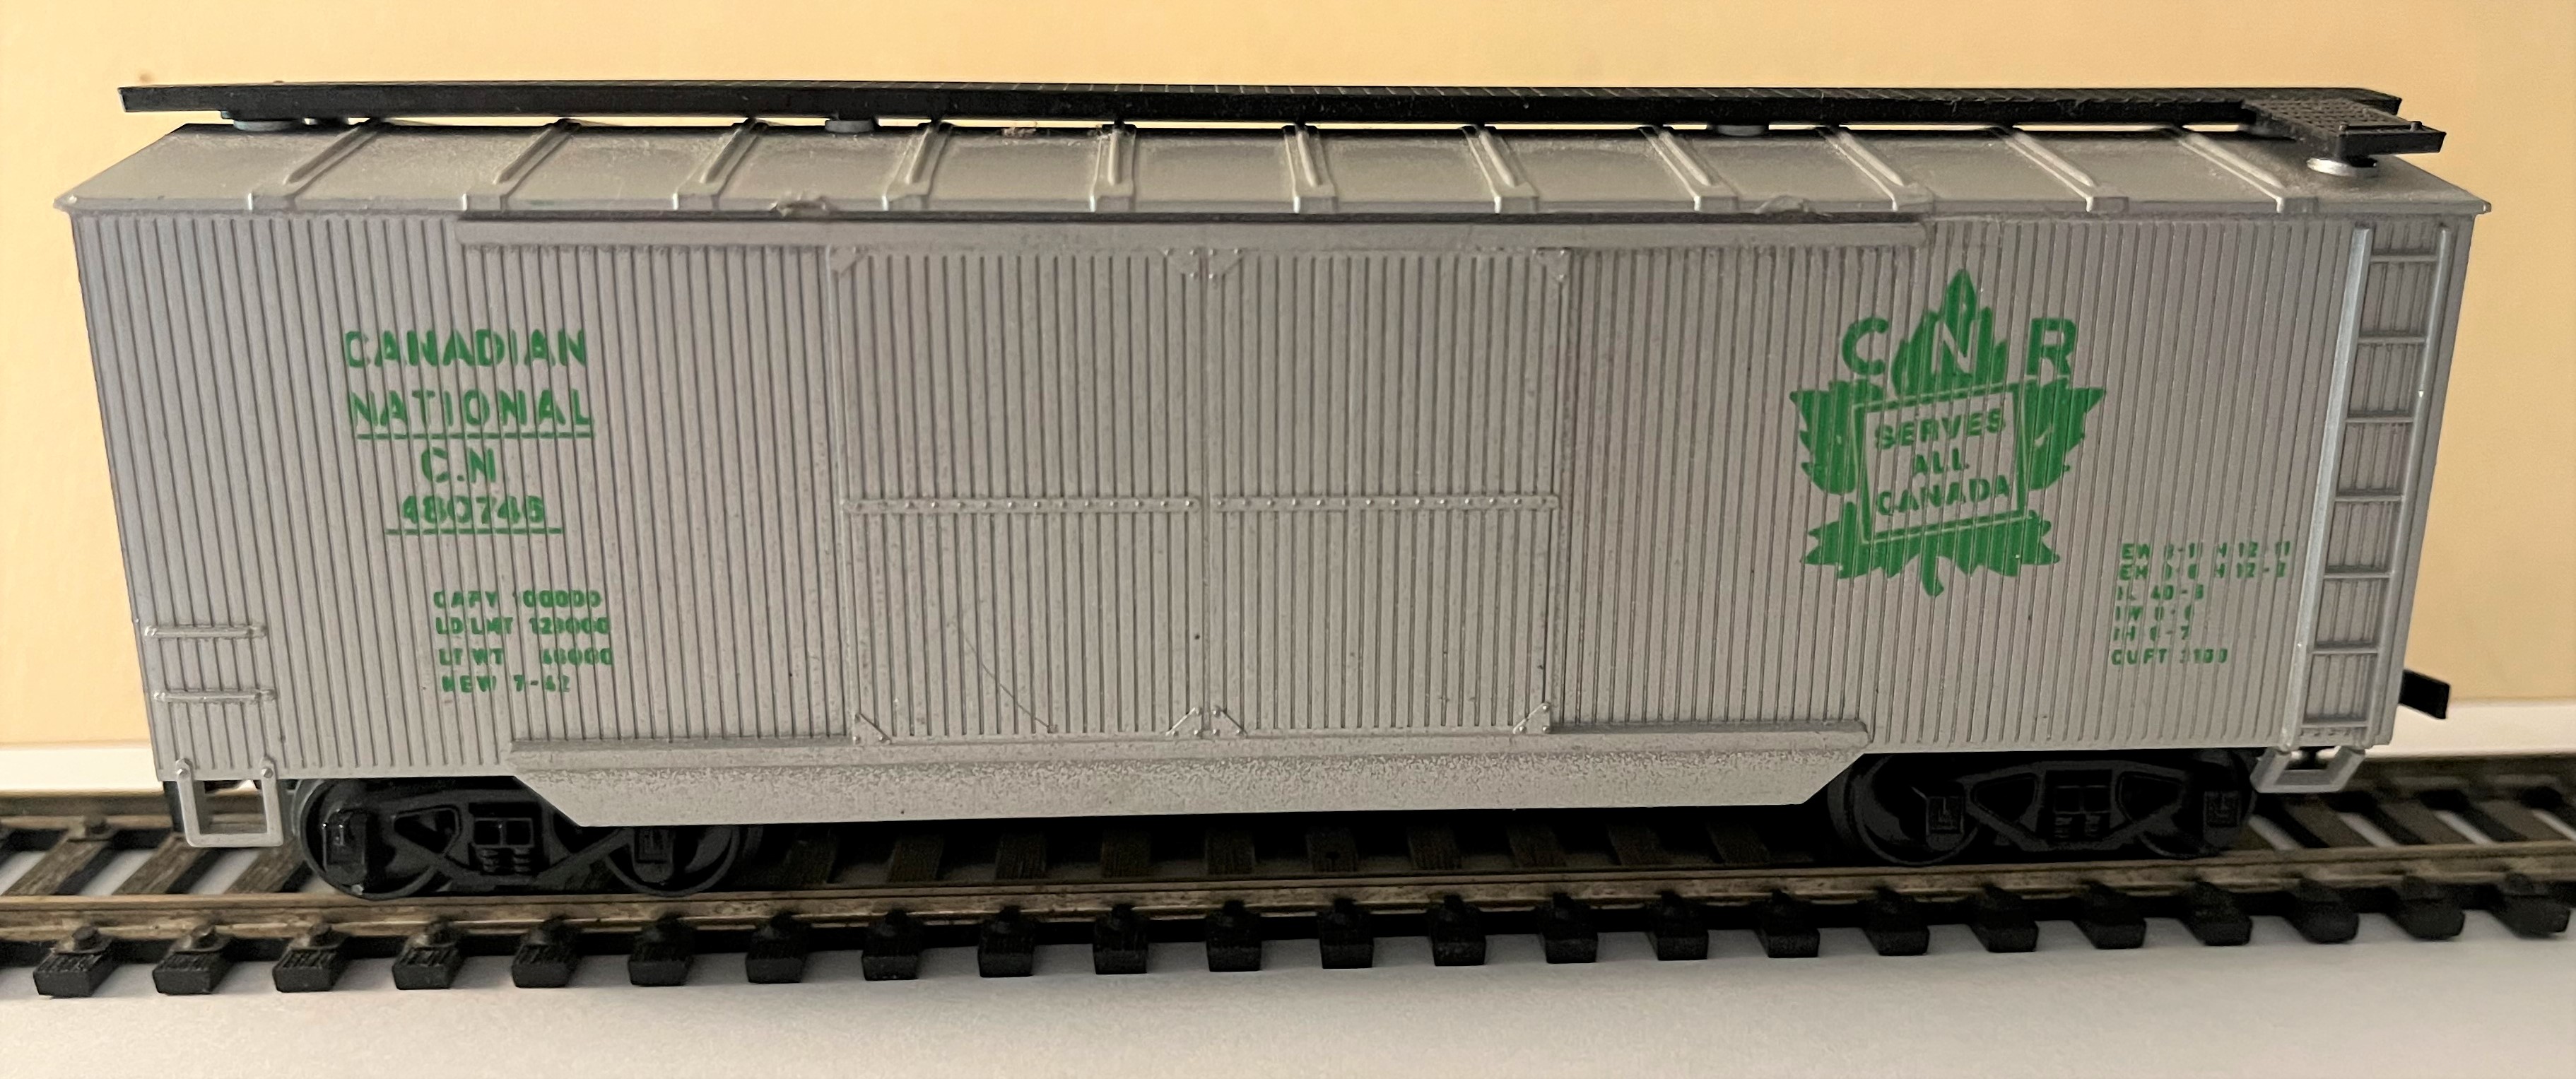 HO Scale - Model Power - Boxcar, 40 Foot, PS-1 - Canadian National - 480746